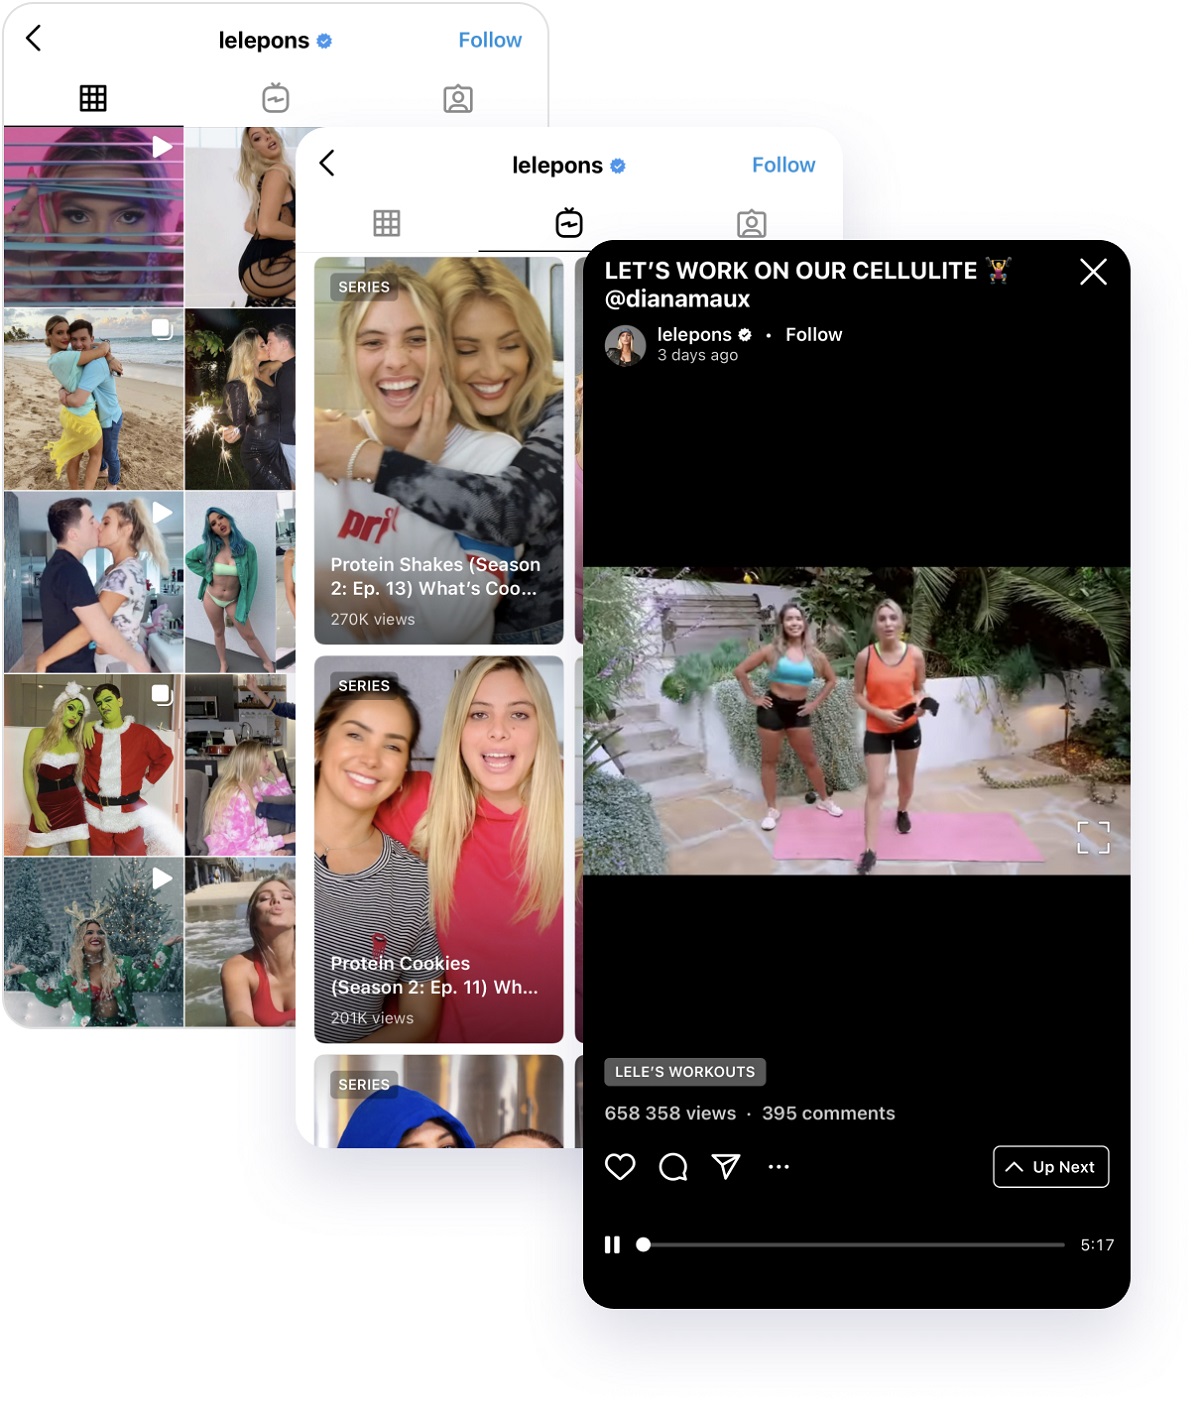 IGTV to gain followers in 2021